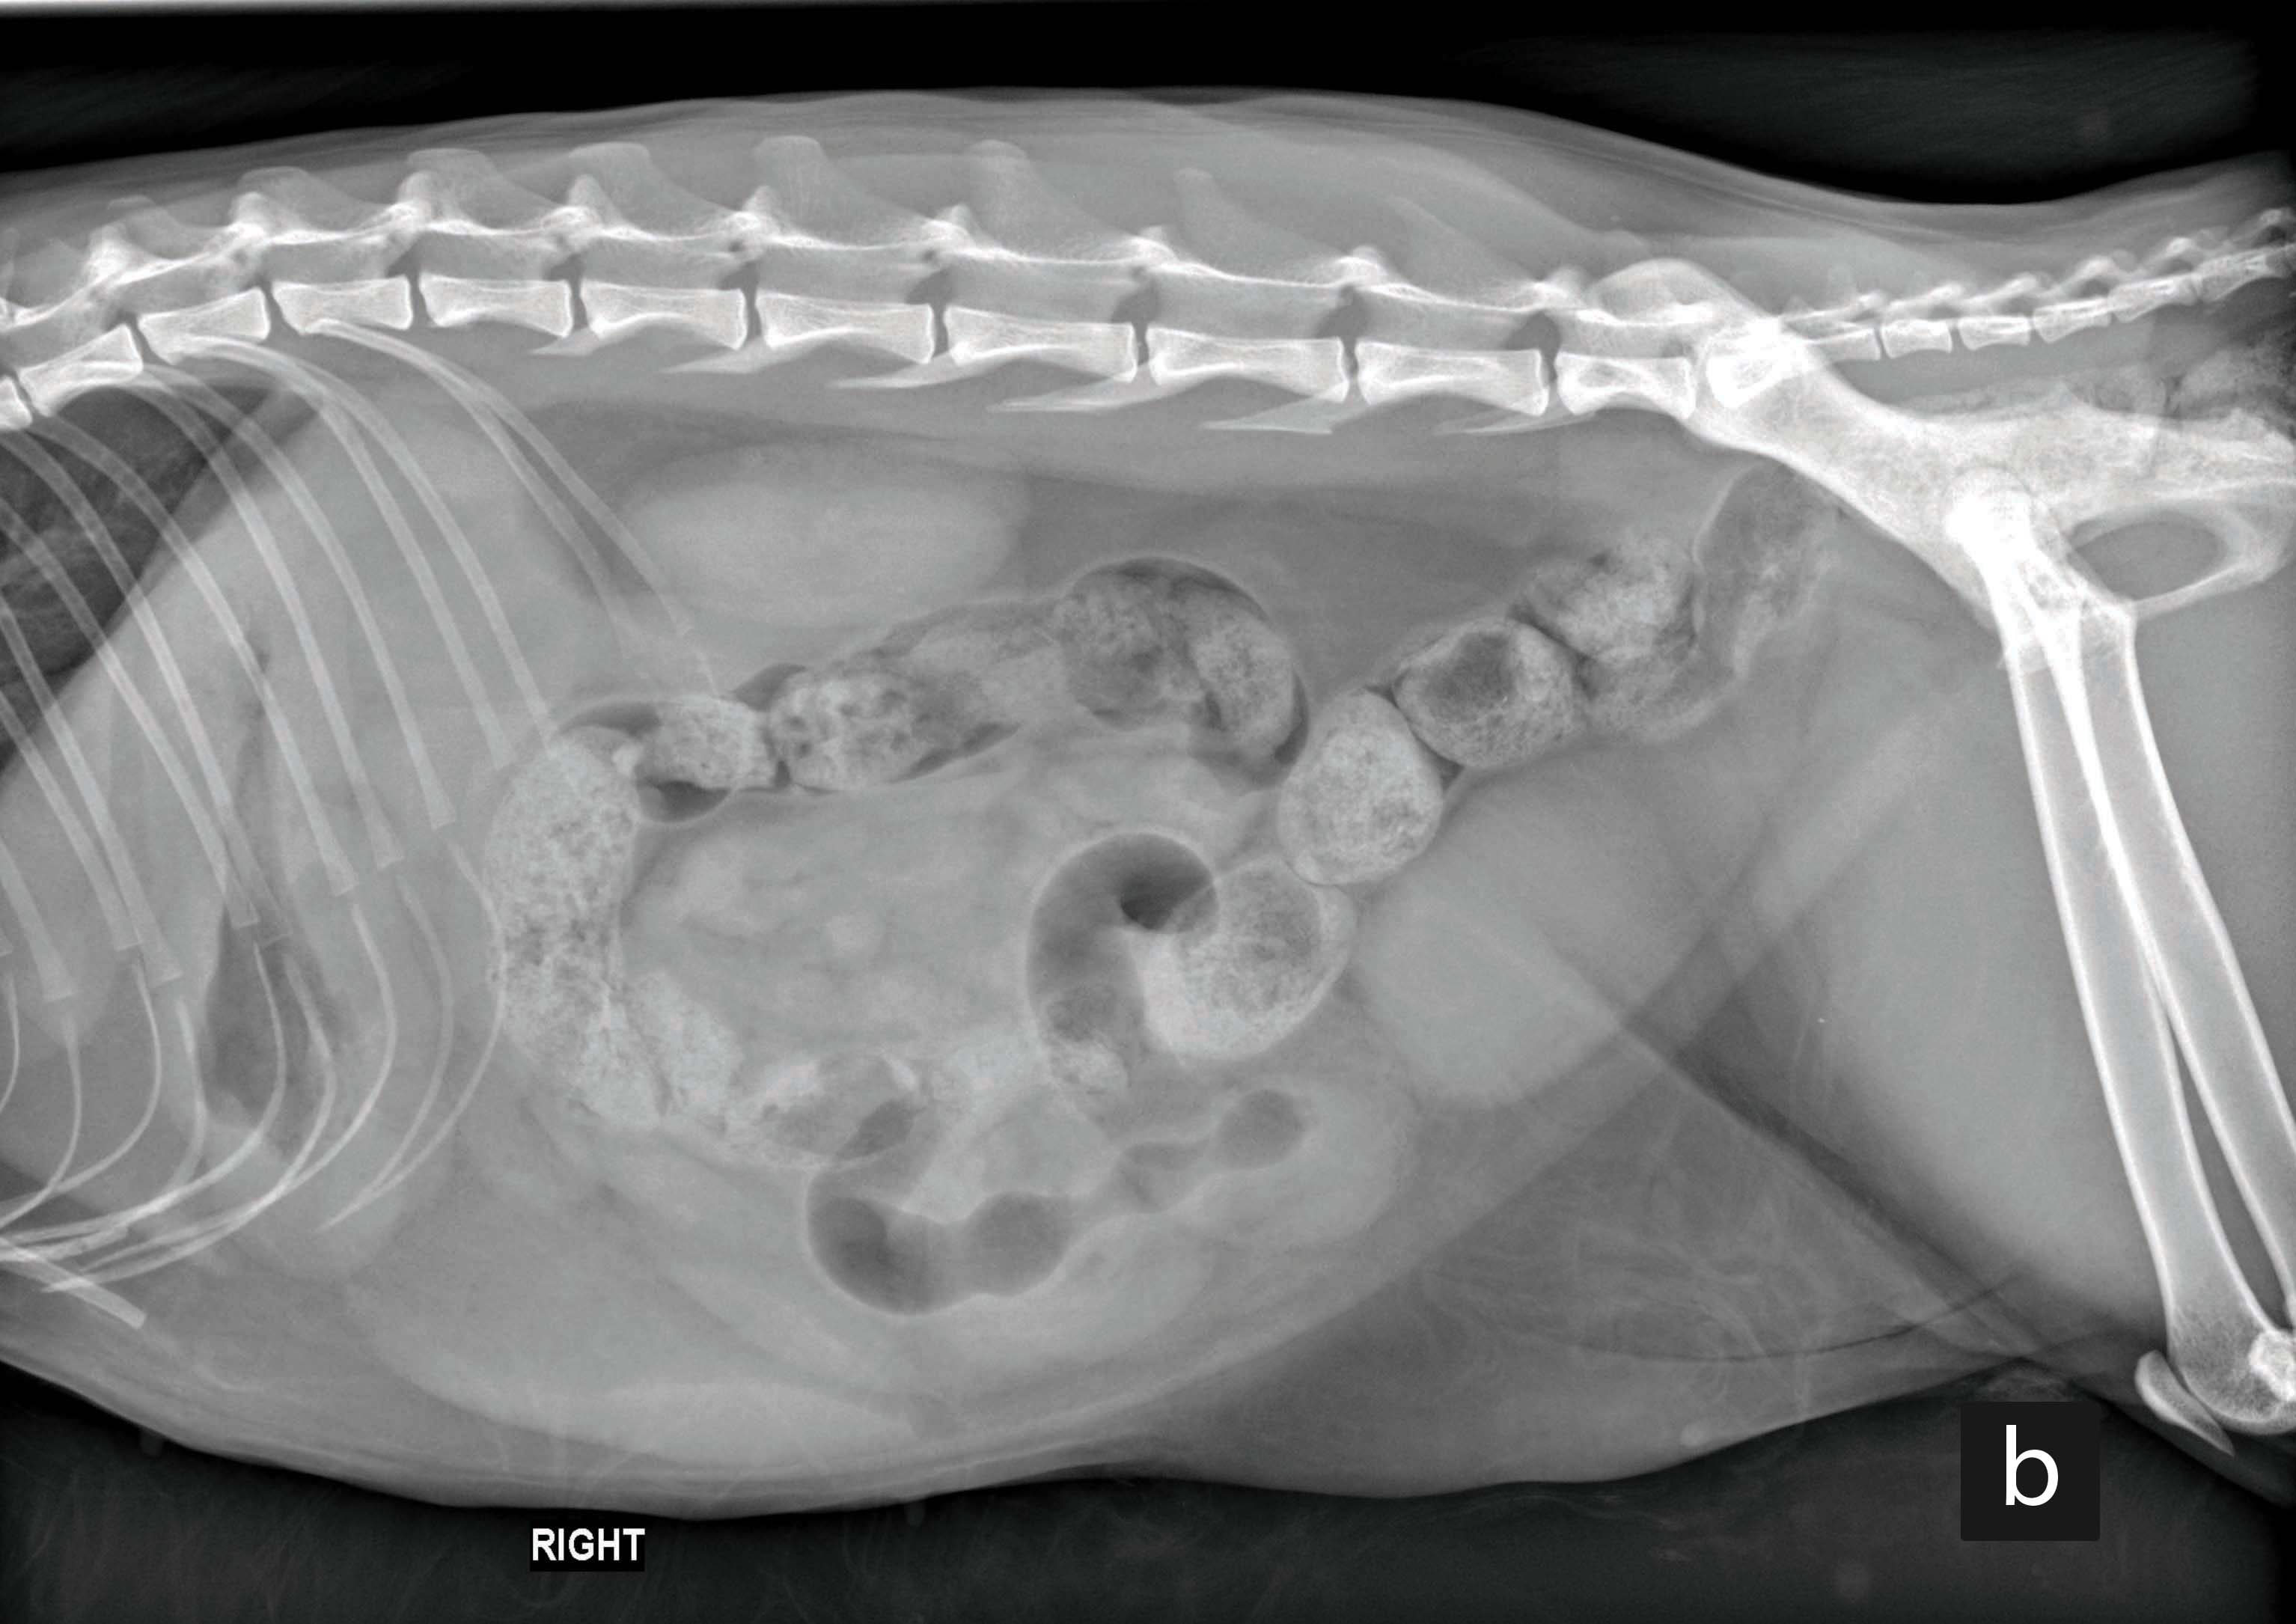 Right lateral abdominal radiographs from an adult cat presented with acute vomiting and diagnosed with intestinal intussusception